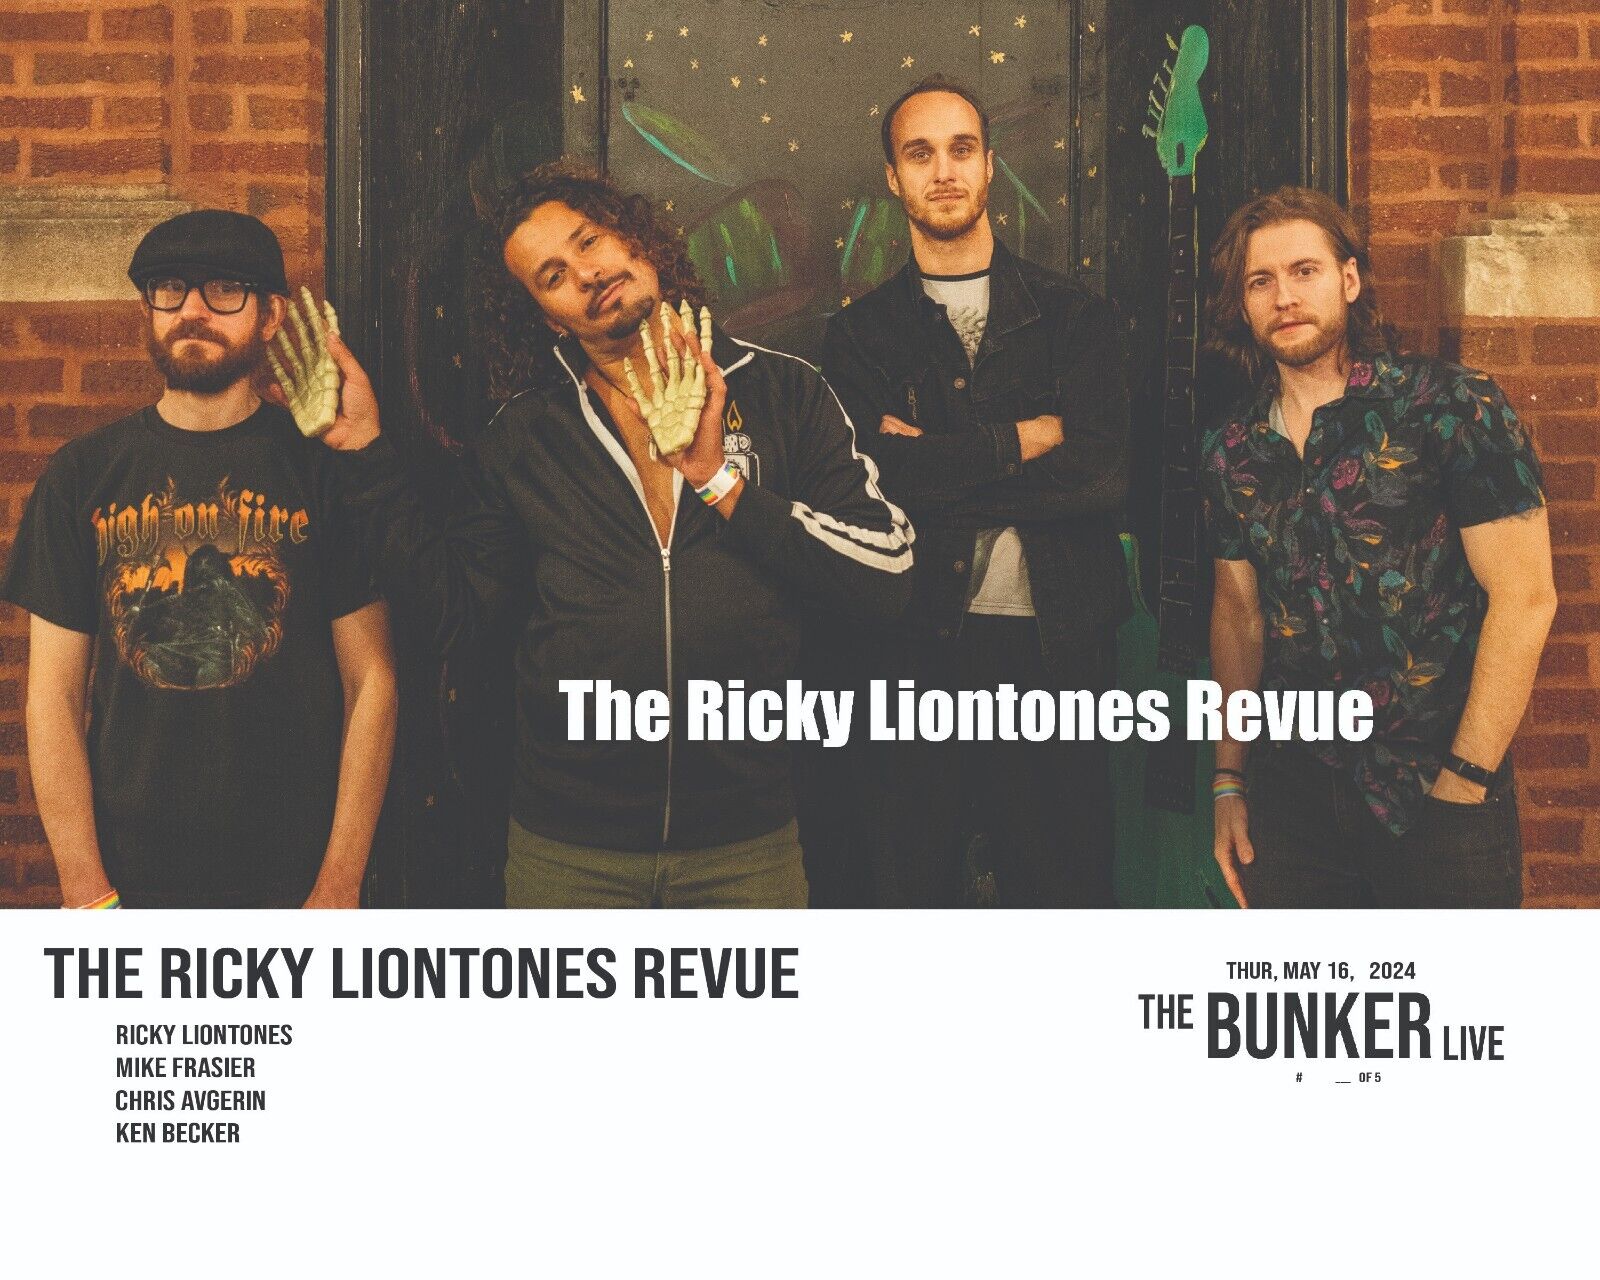 Collectable  Signed Photo, Ricky Liontones,   from The Bunker show,  8x10